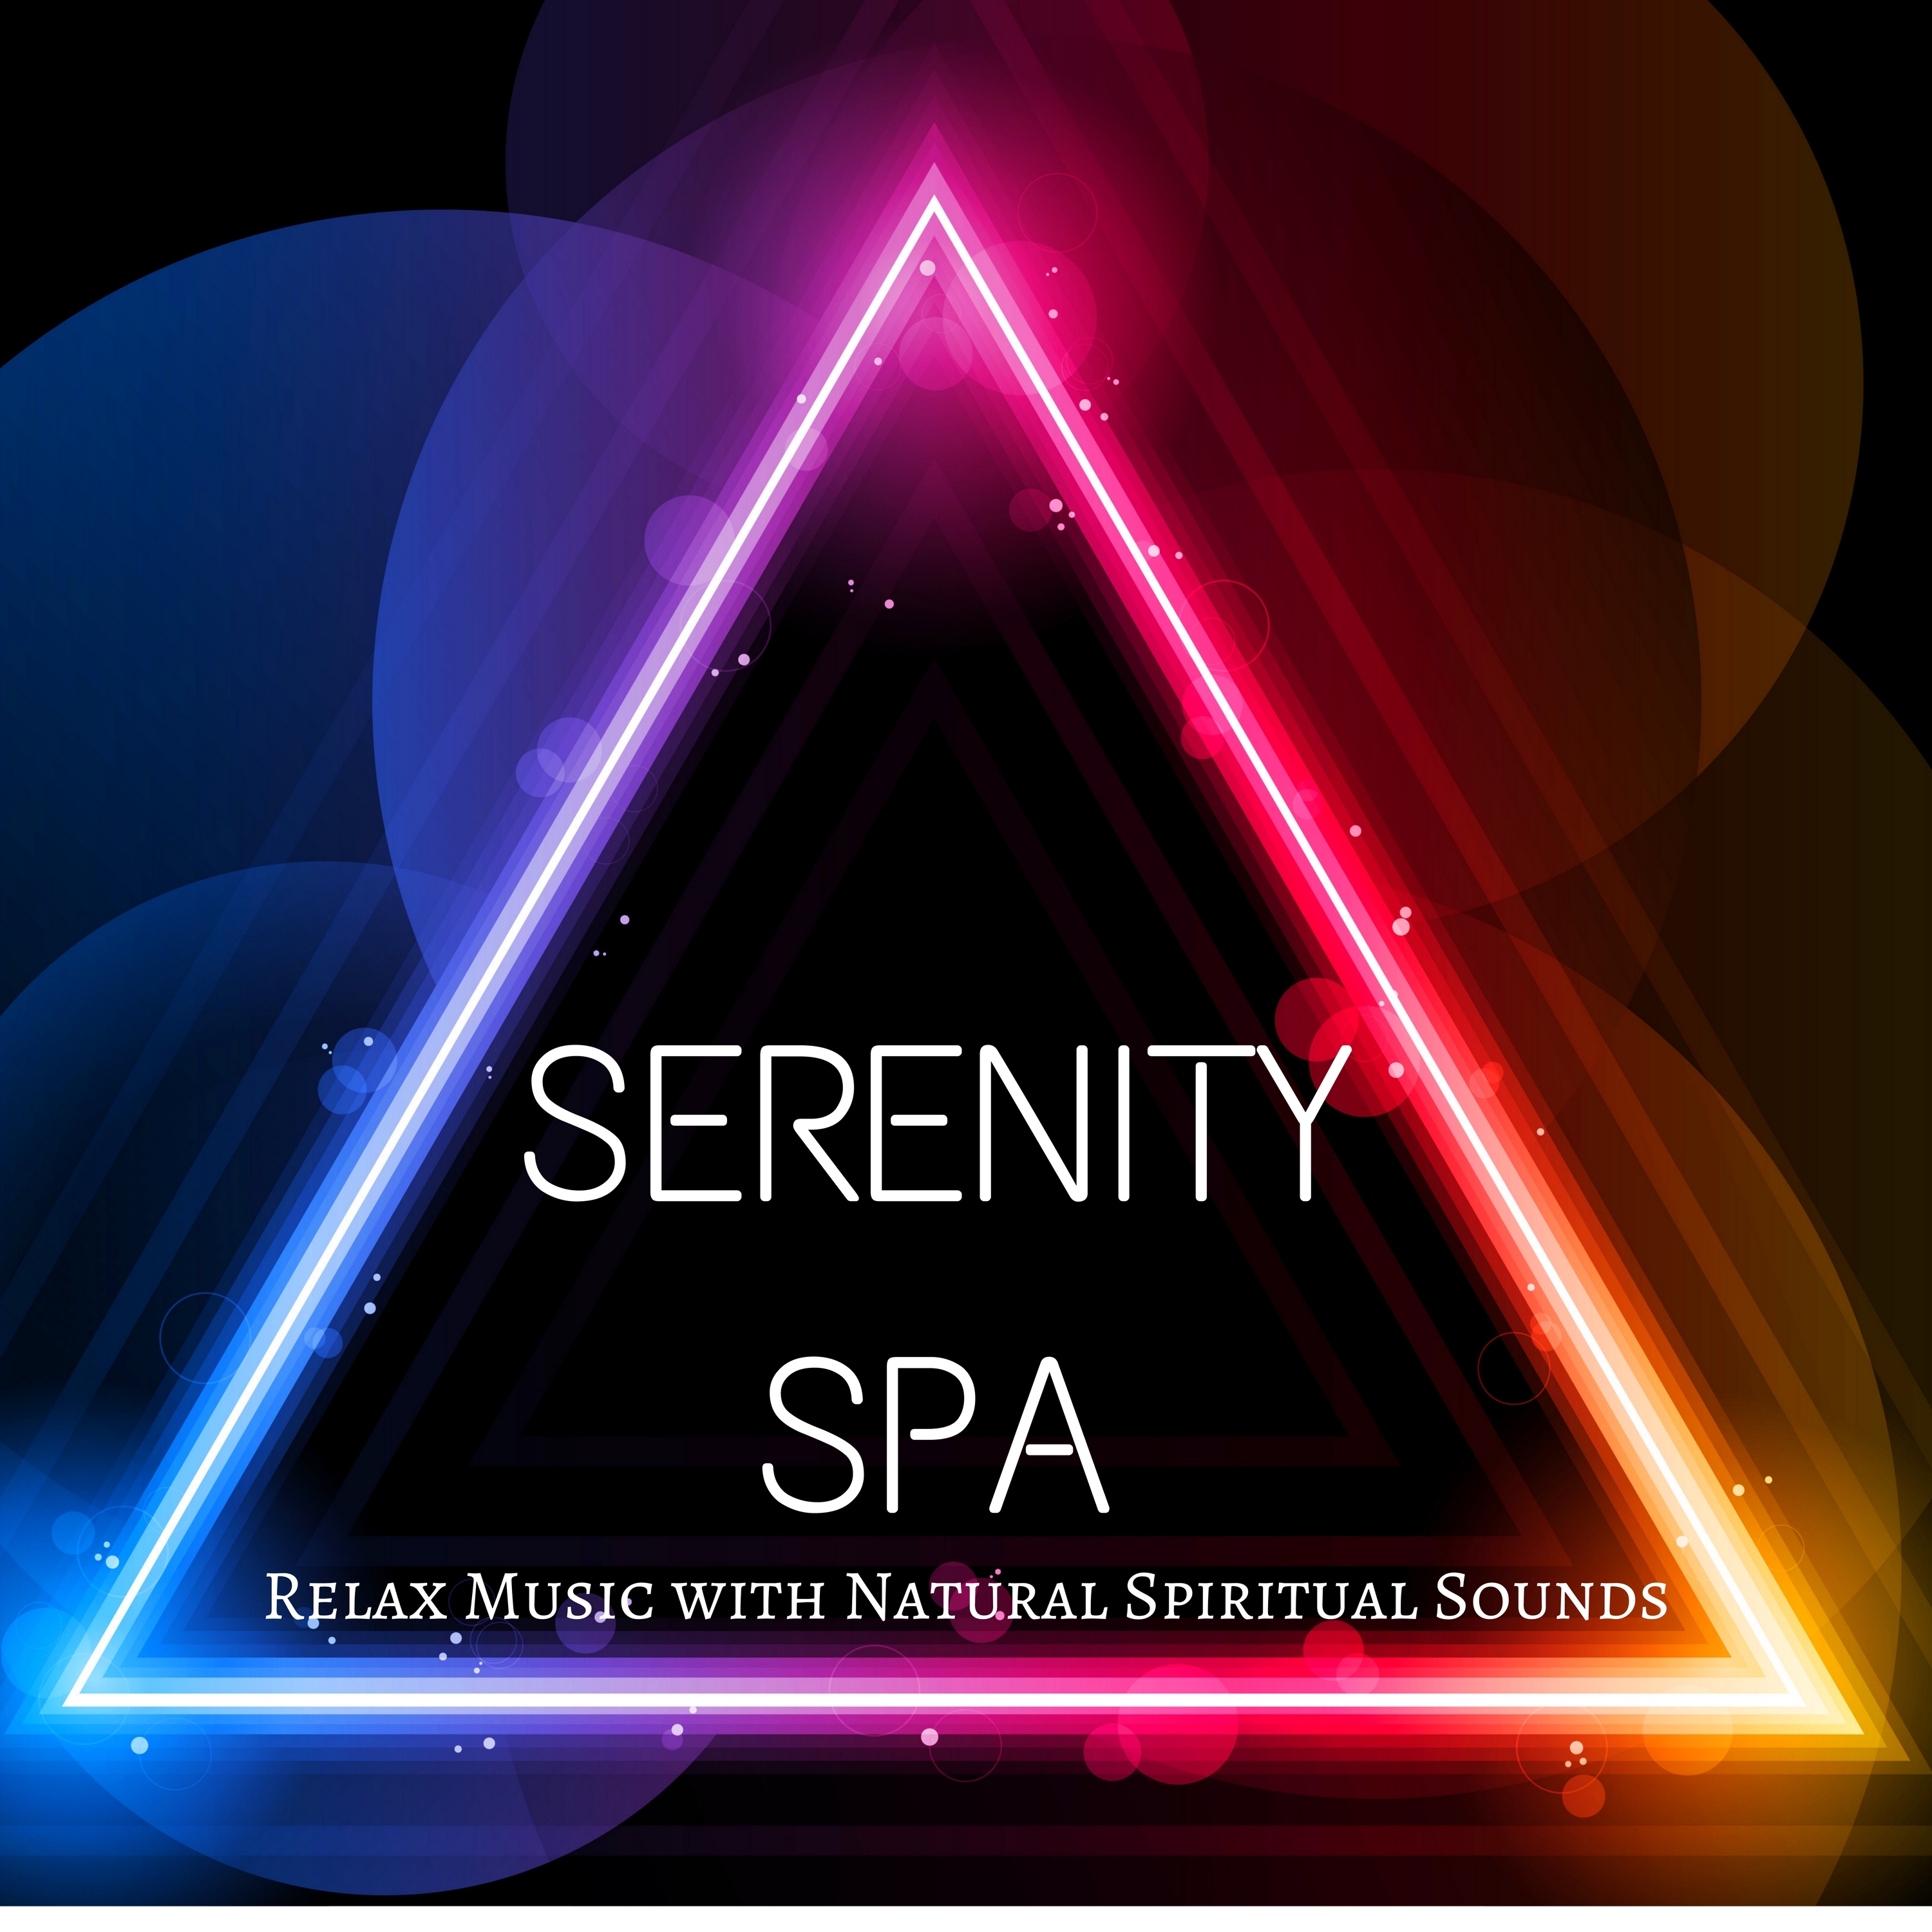 Serenity Spa: Total Relaxation, Natural Forest, Relax Music with Natural Spiritual Sounds